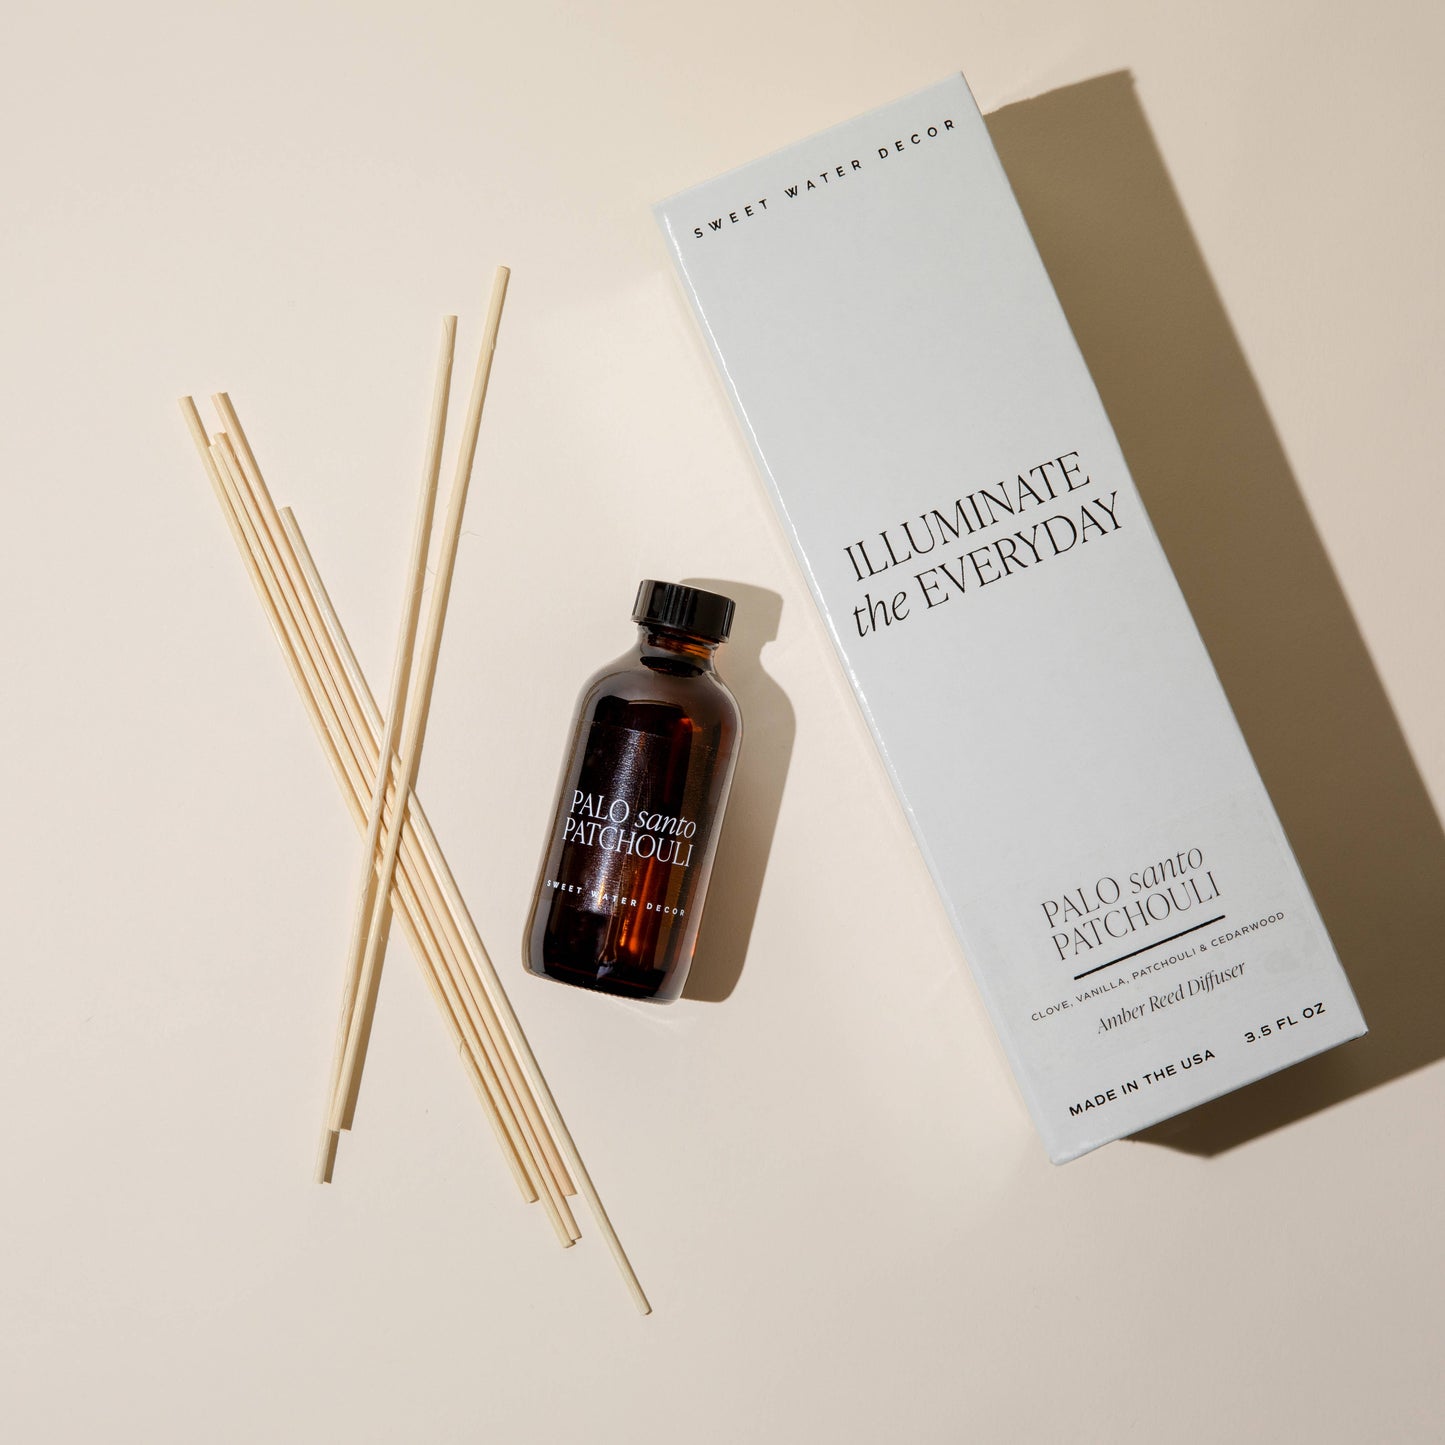 Palo Santo Patchouli Amber Reed Diffuser - Gifts & Decor